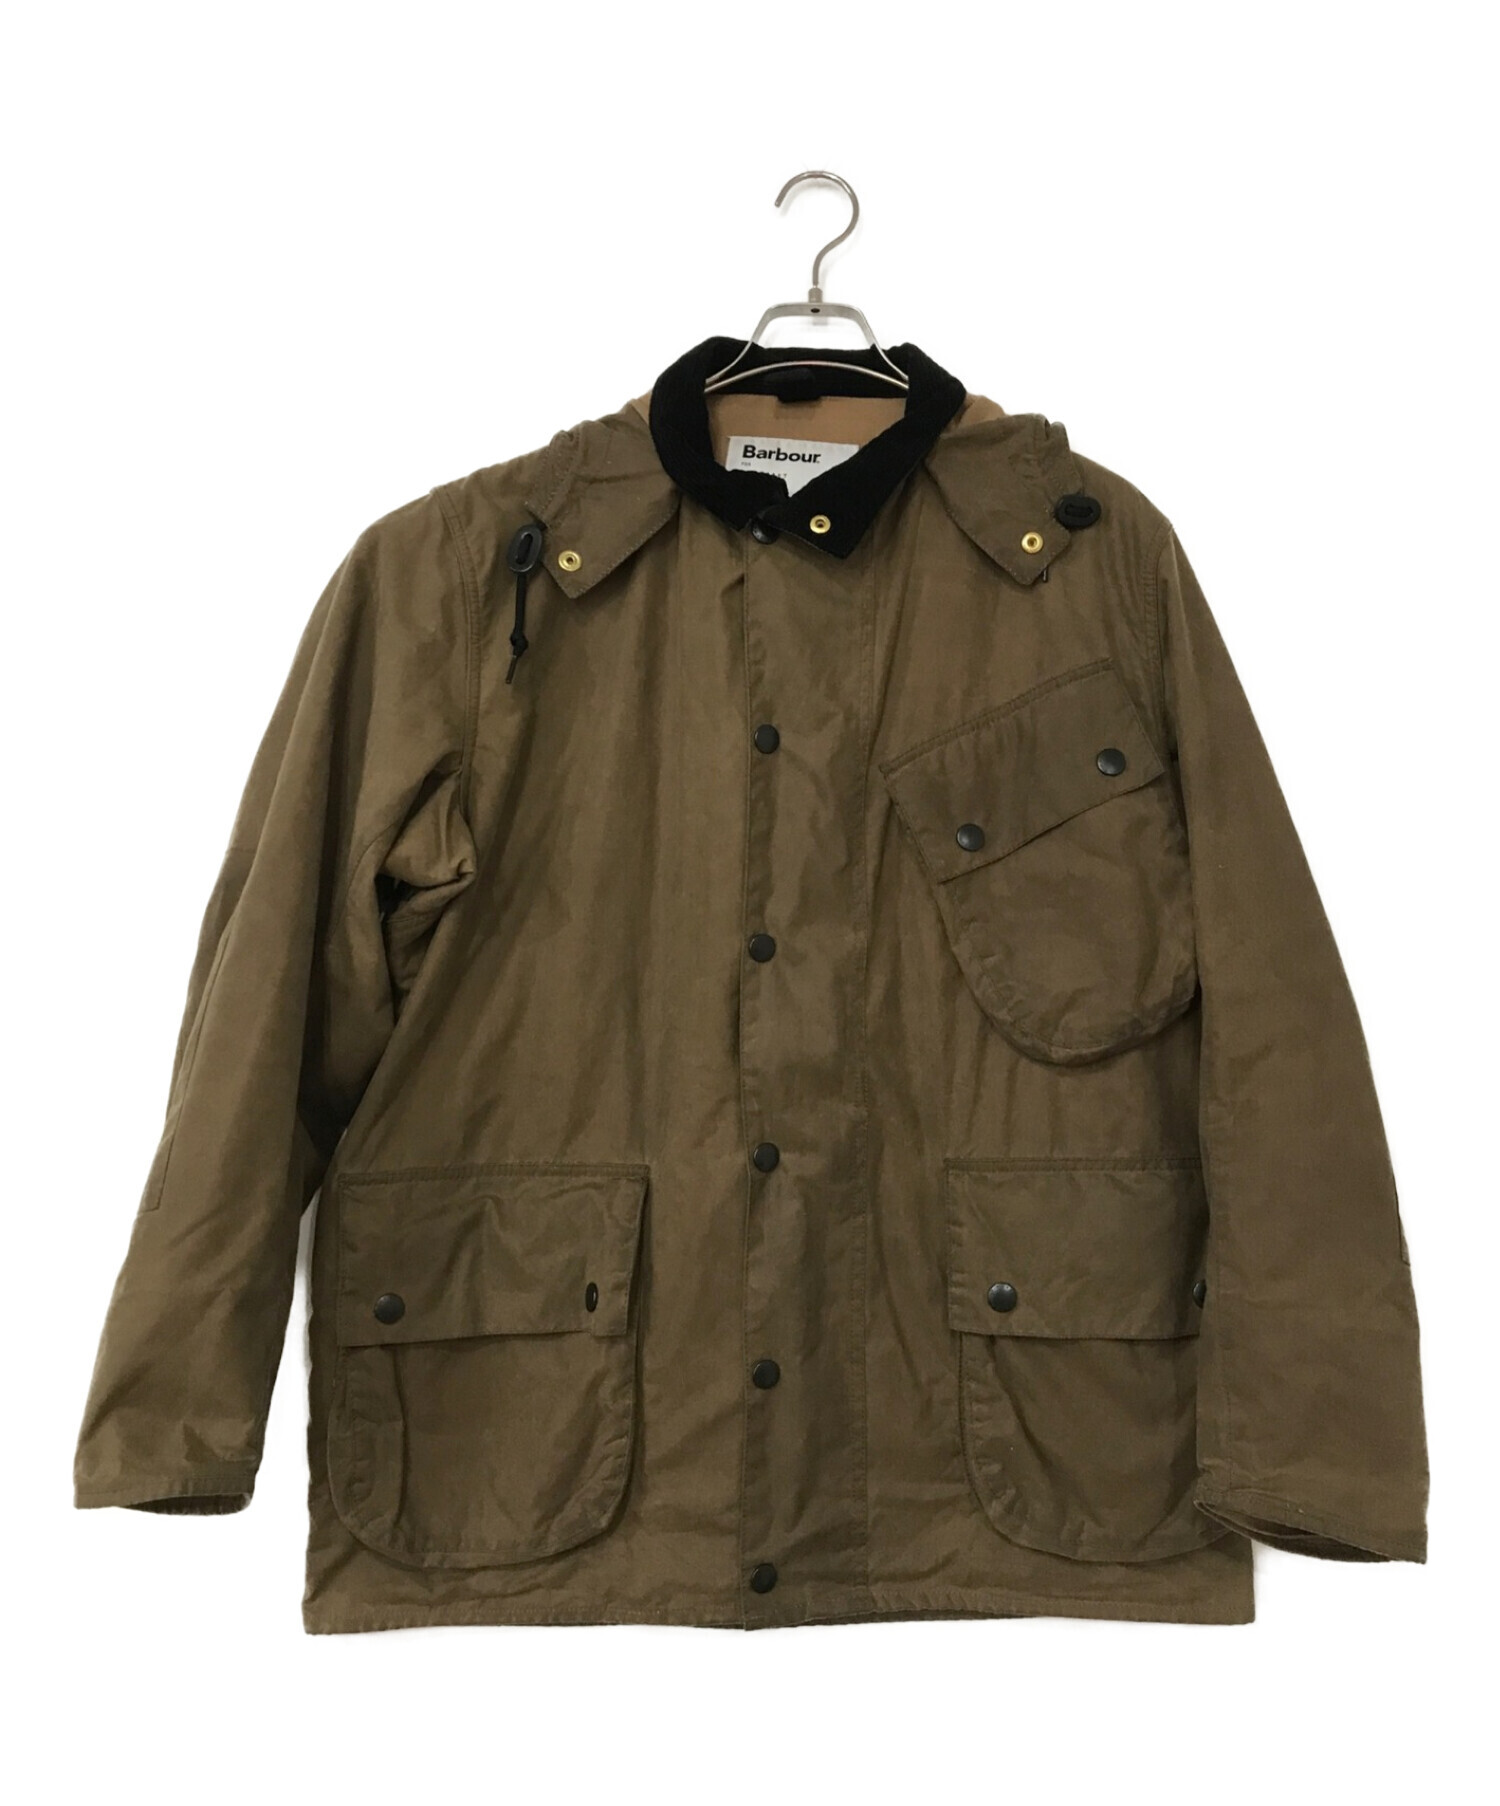 Barbour margaret howell A7 & 諸々セット！